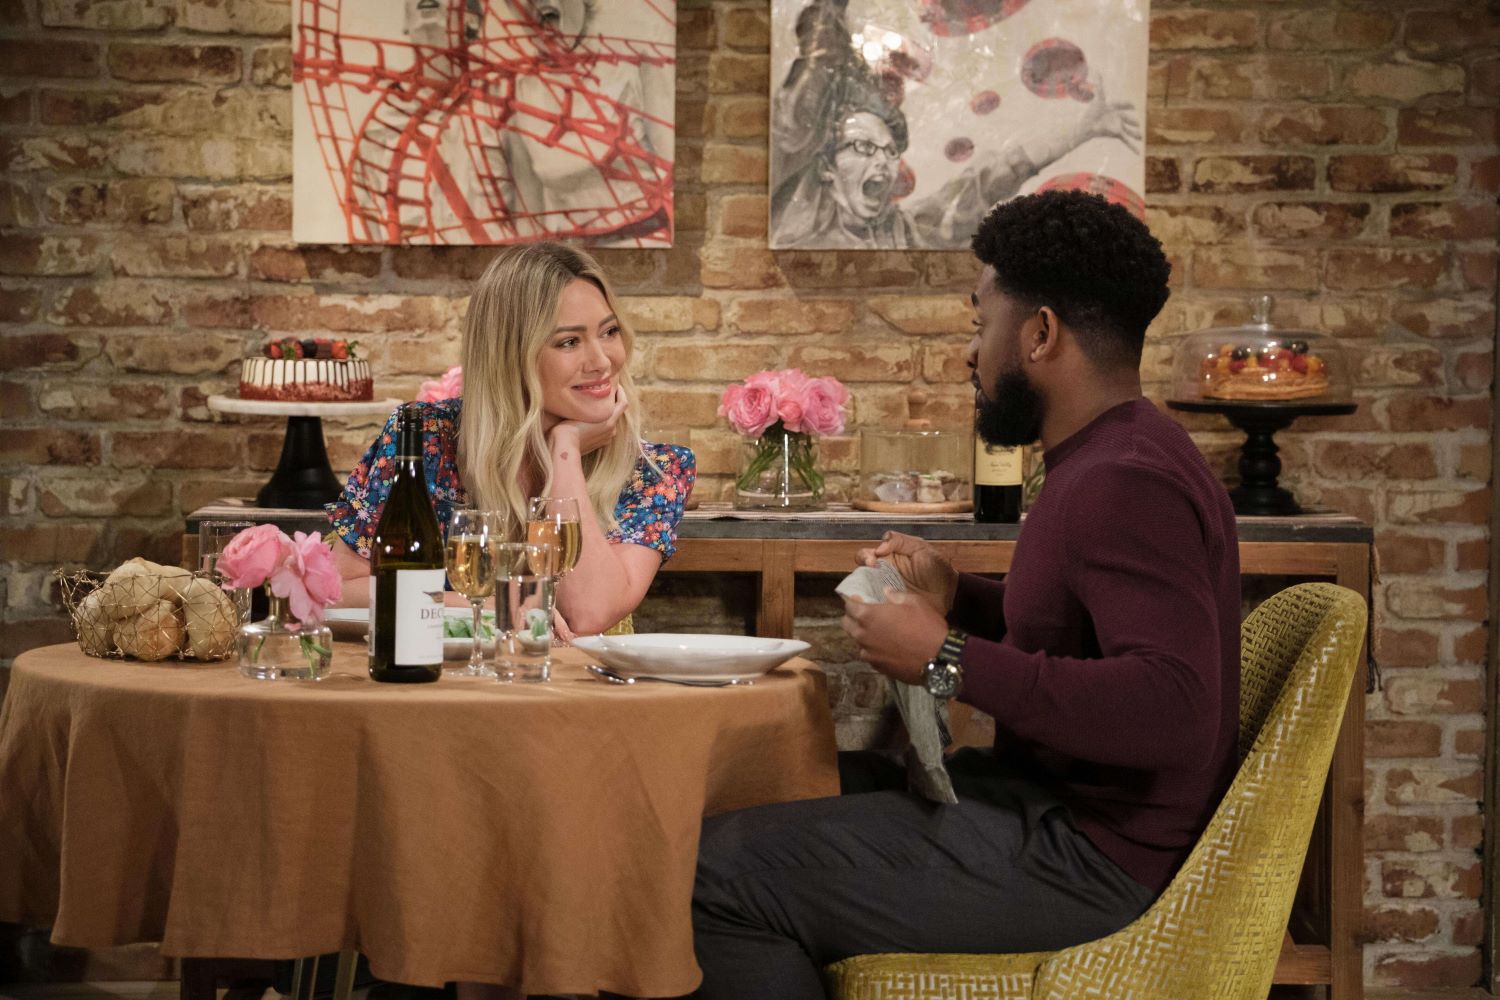 Hilary Duff as Sophie and Daniel Augustin as Ian in 'How I Met Your Father' Season 2 Episode 7 on Hulu.